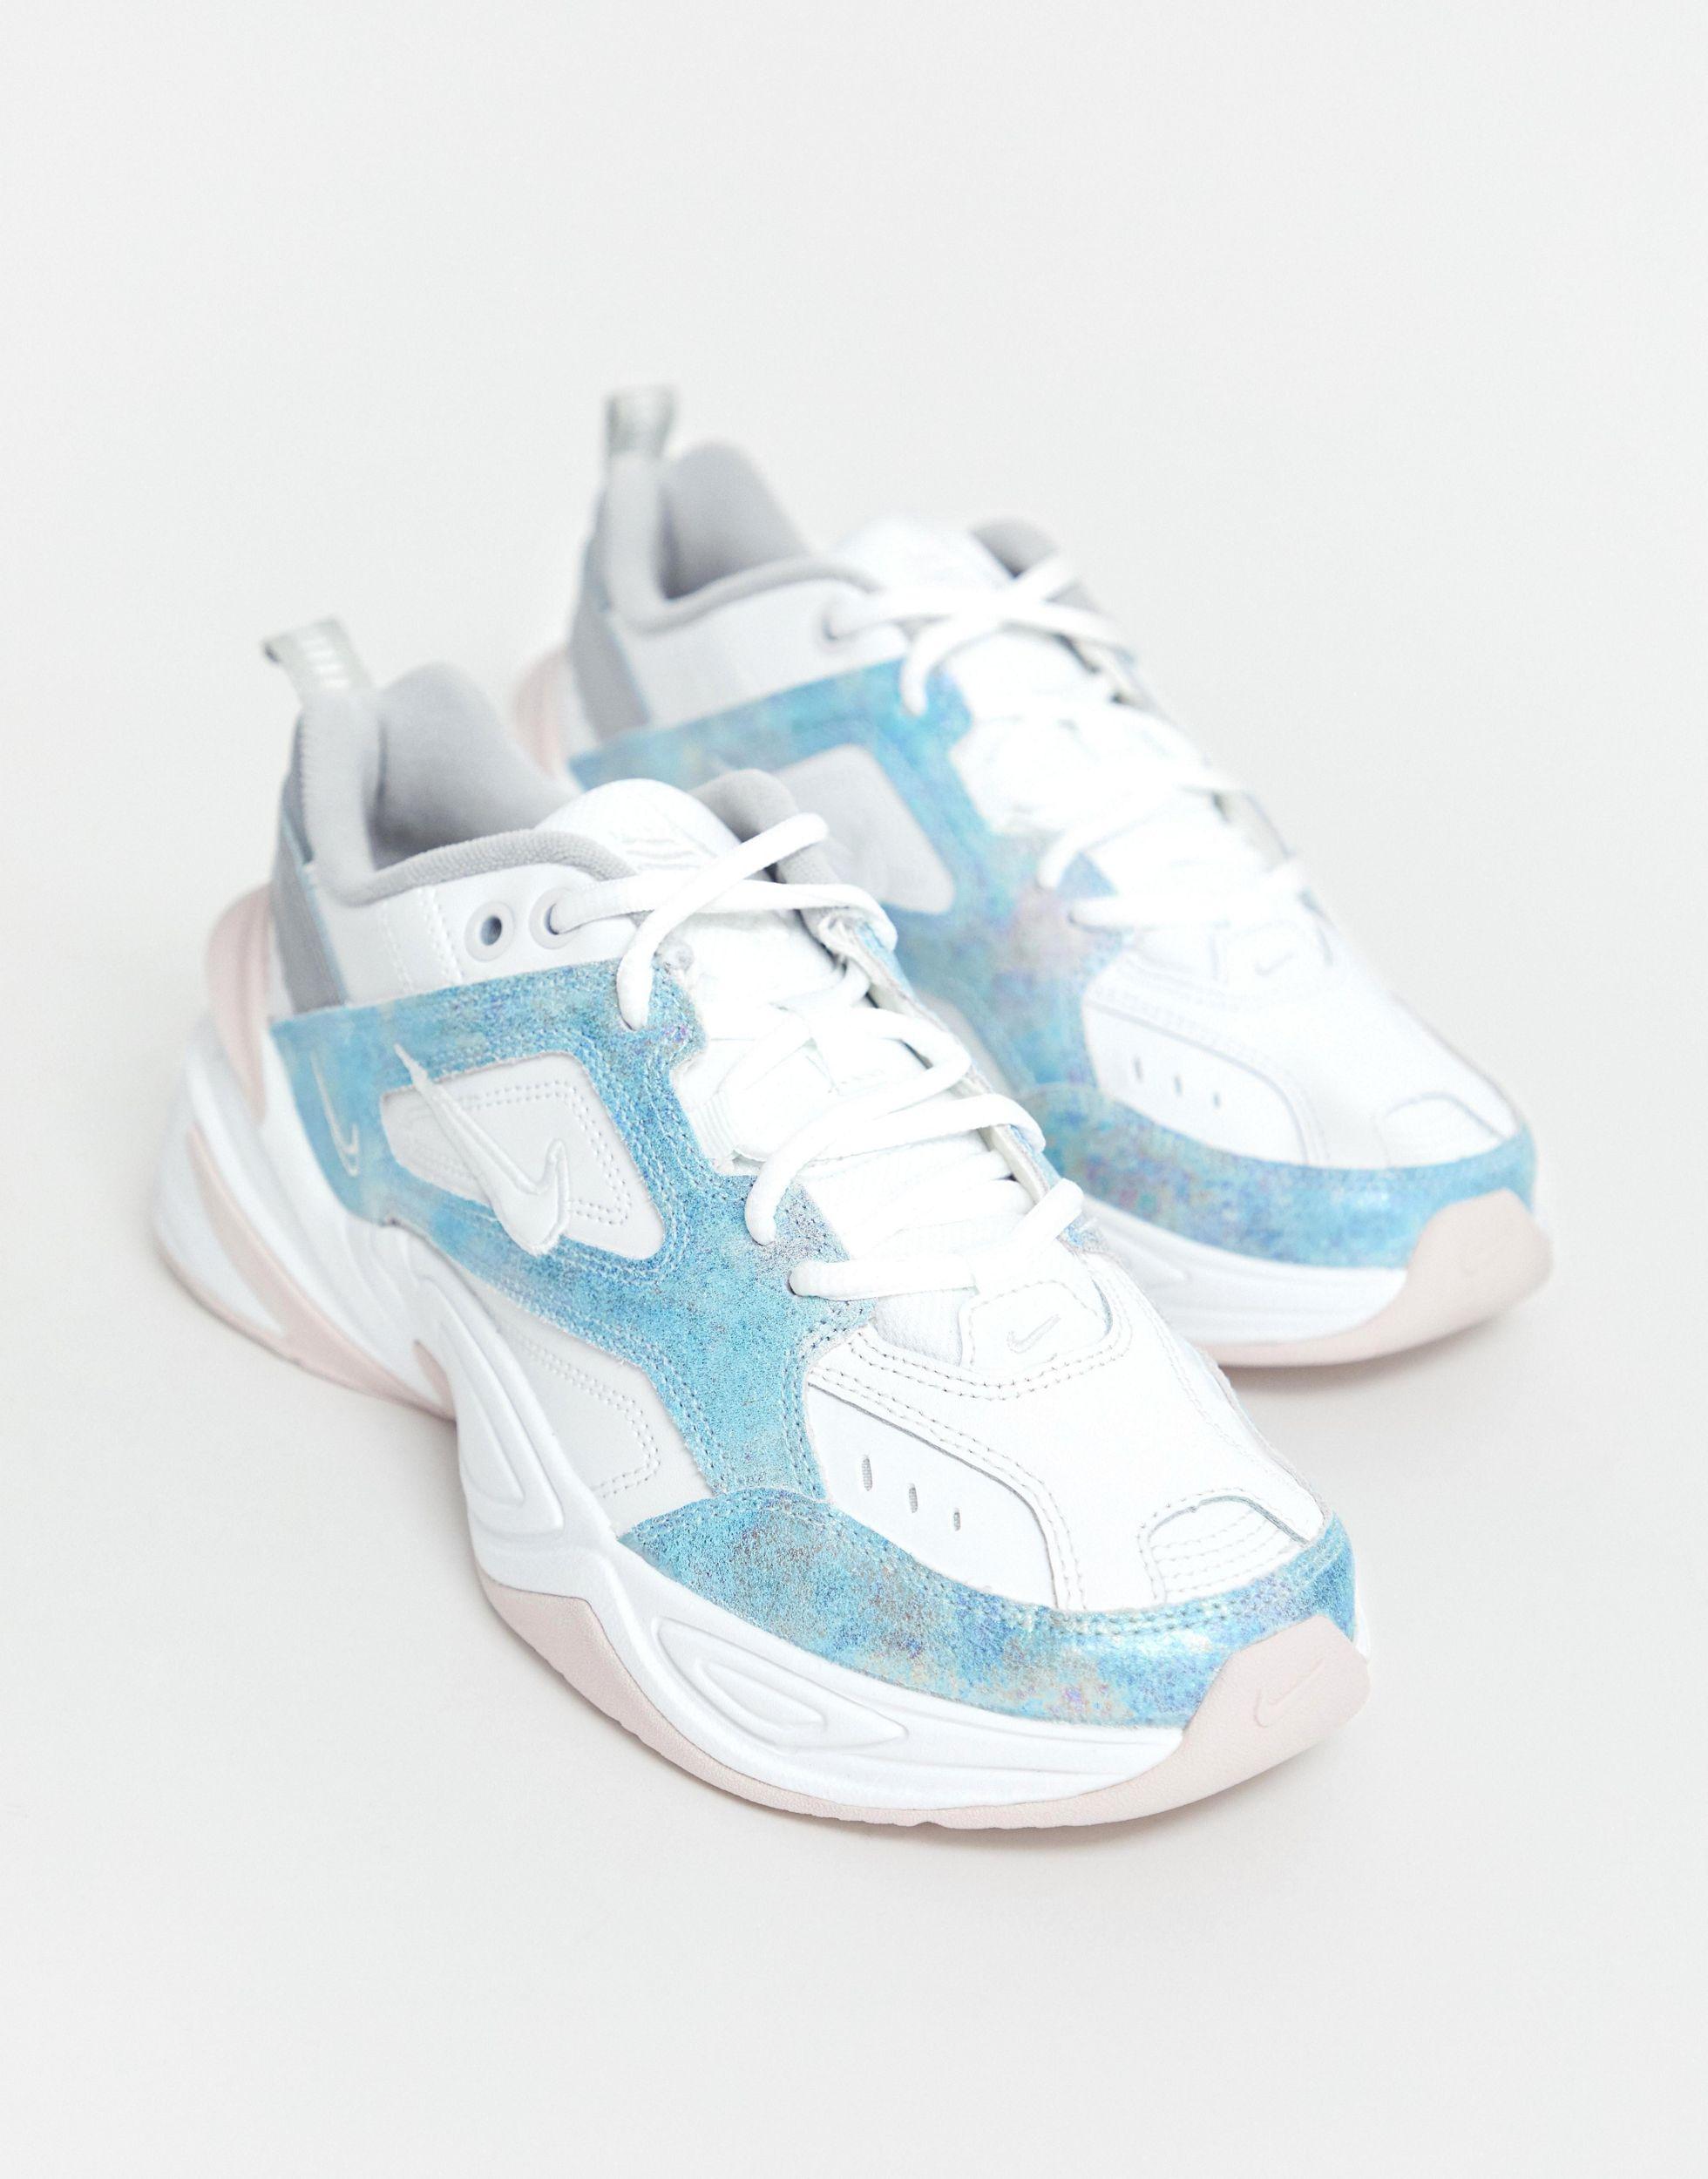 nike m2k tekno sneakers in iridescent pink and blue